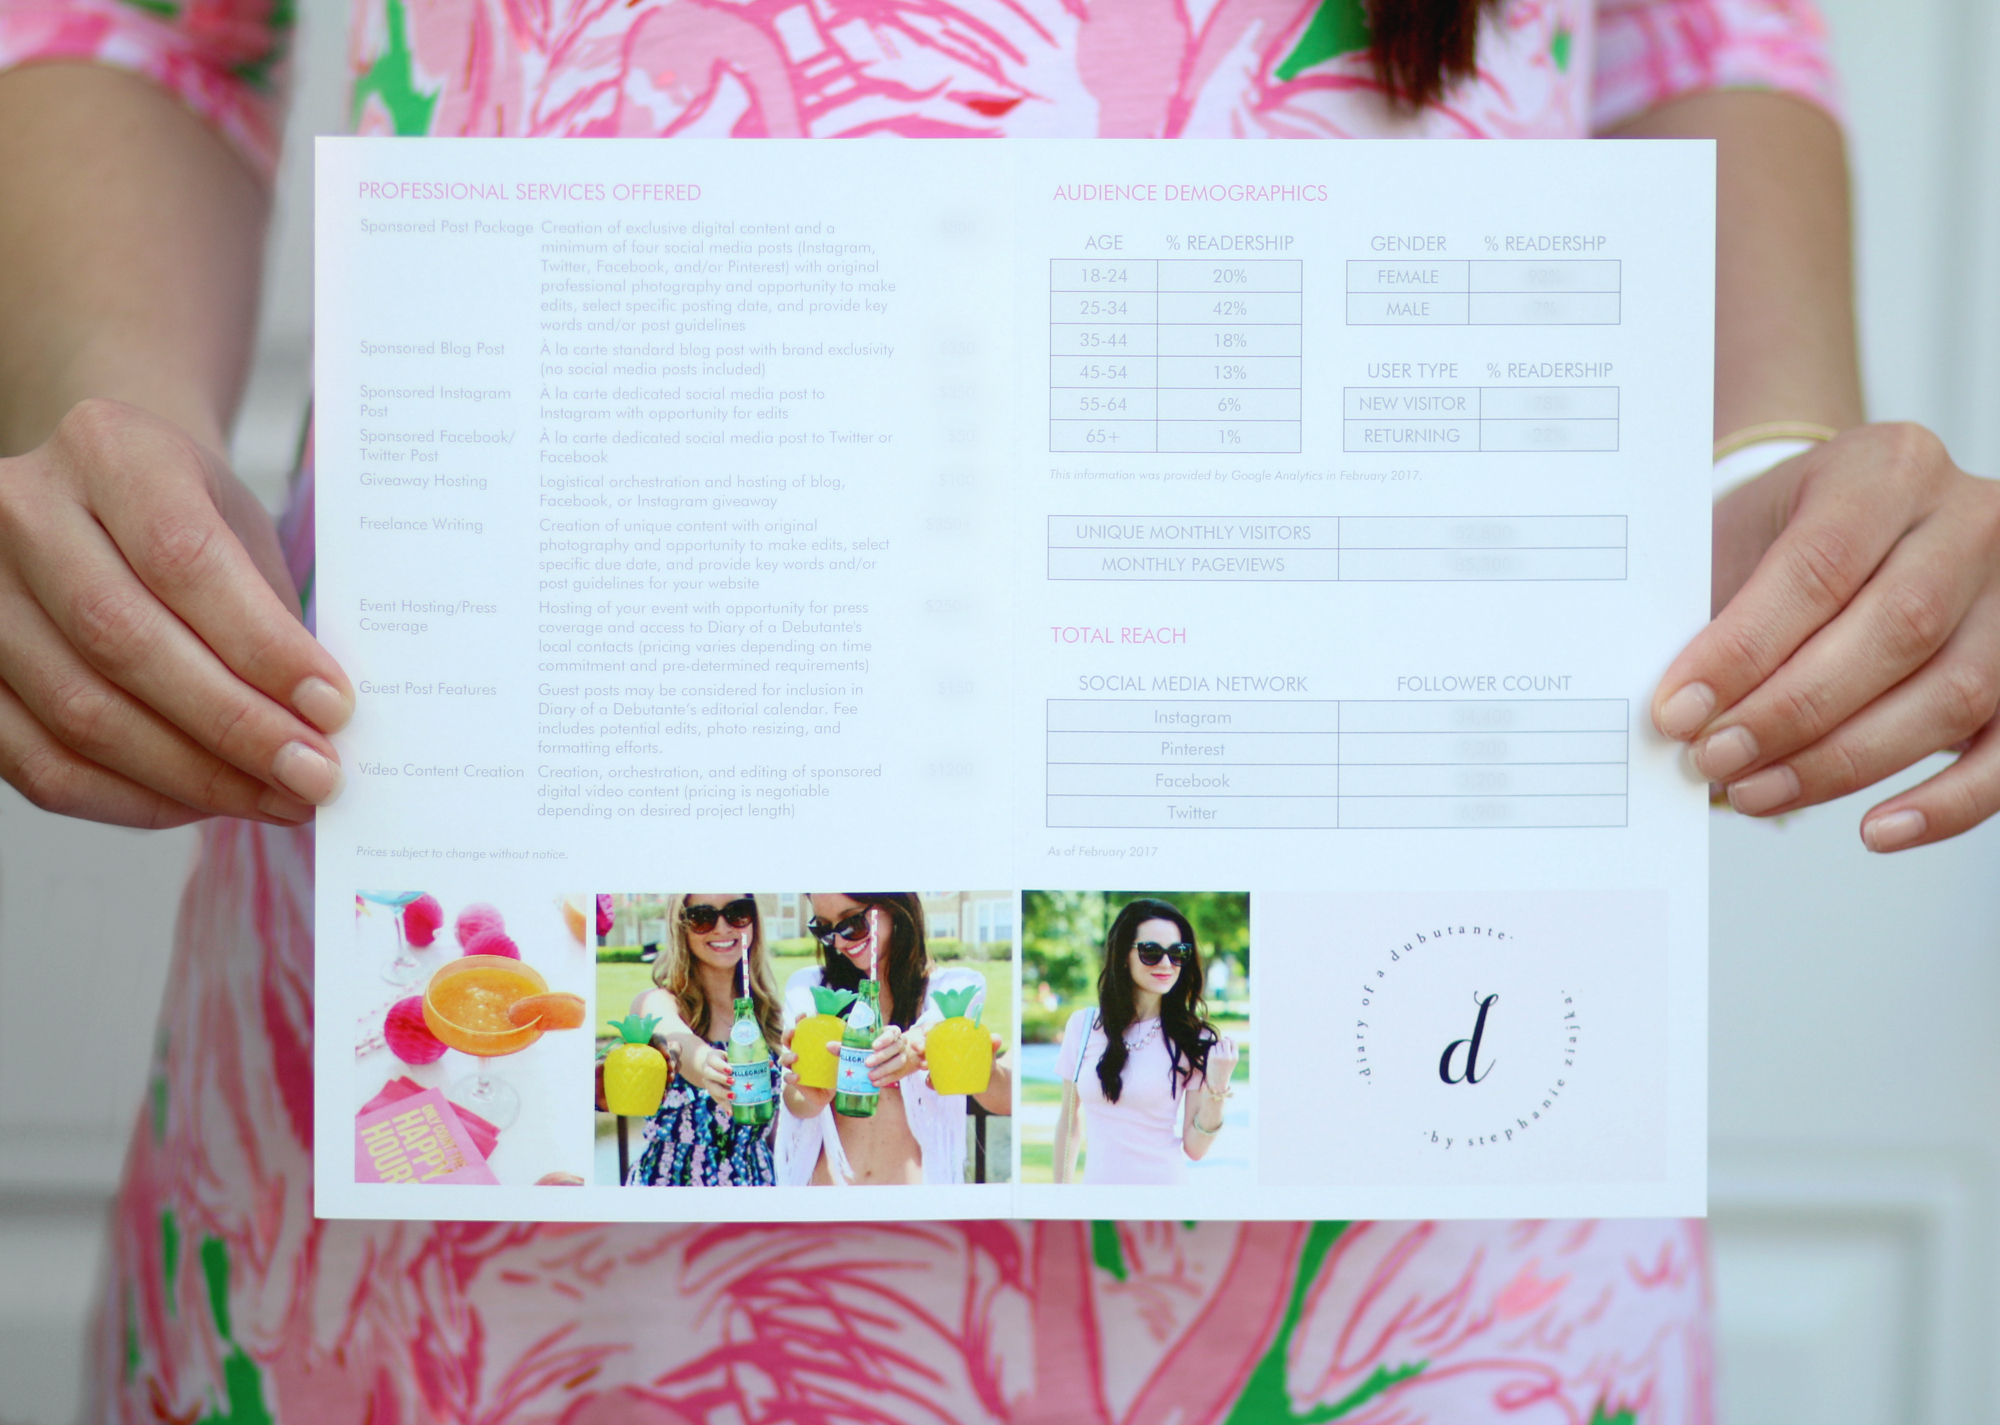 How to create and print an effective media kit with Vistaprint, including recommended media kit contents and guidelines